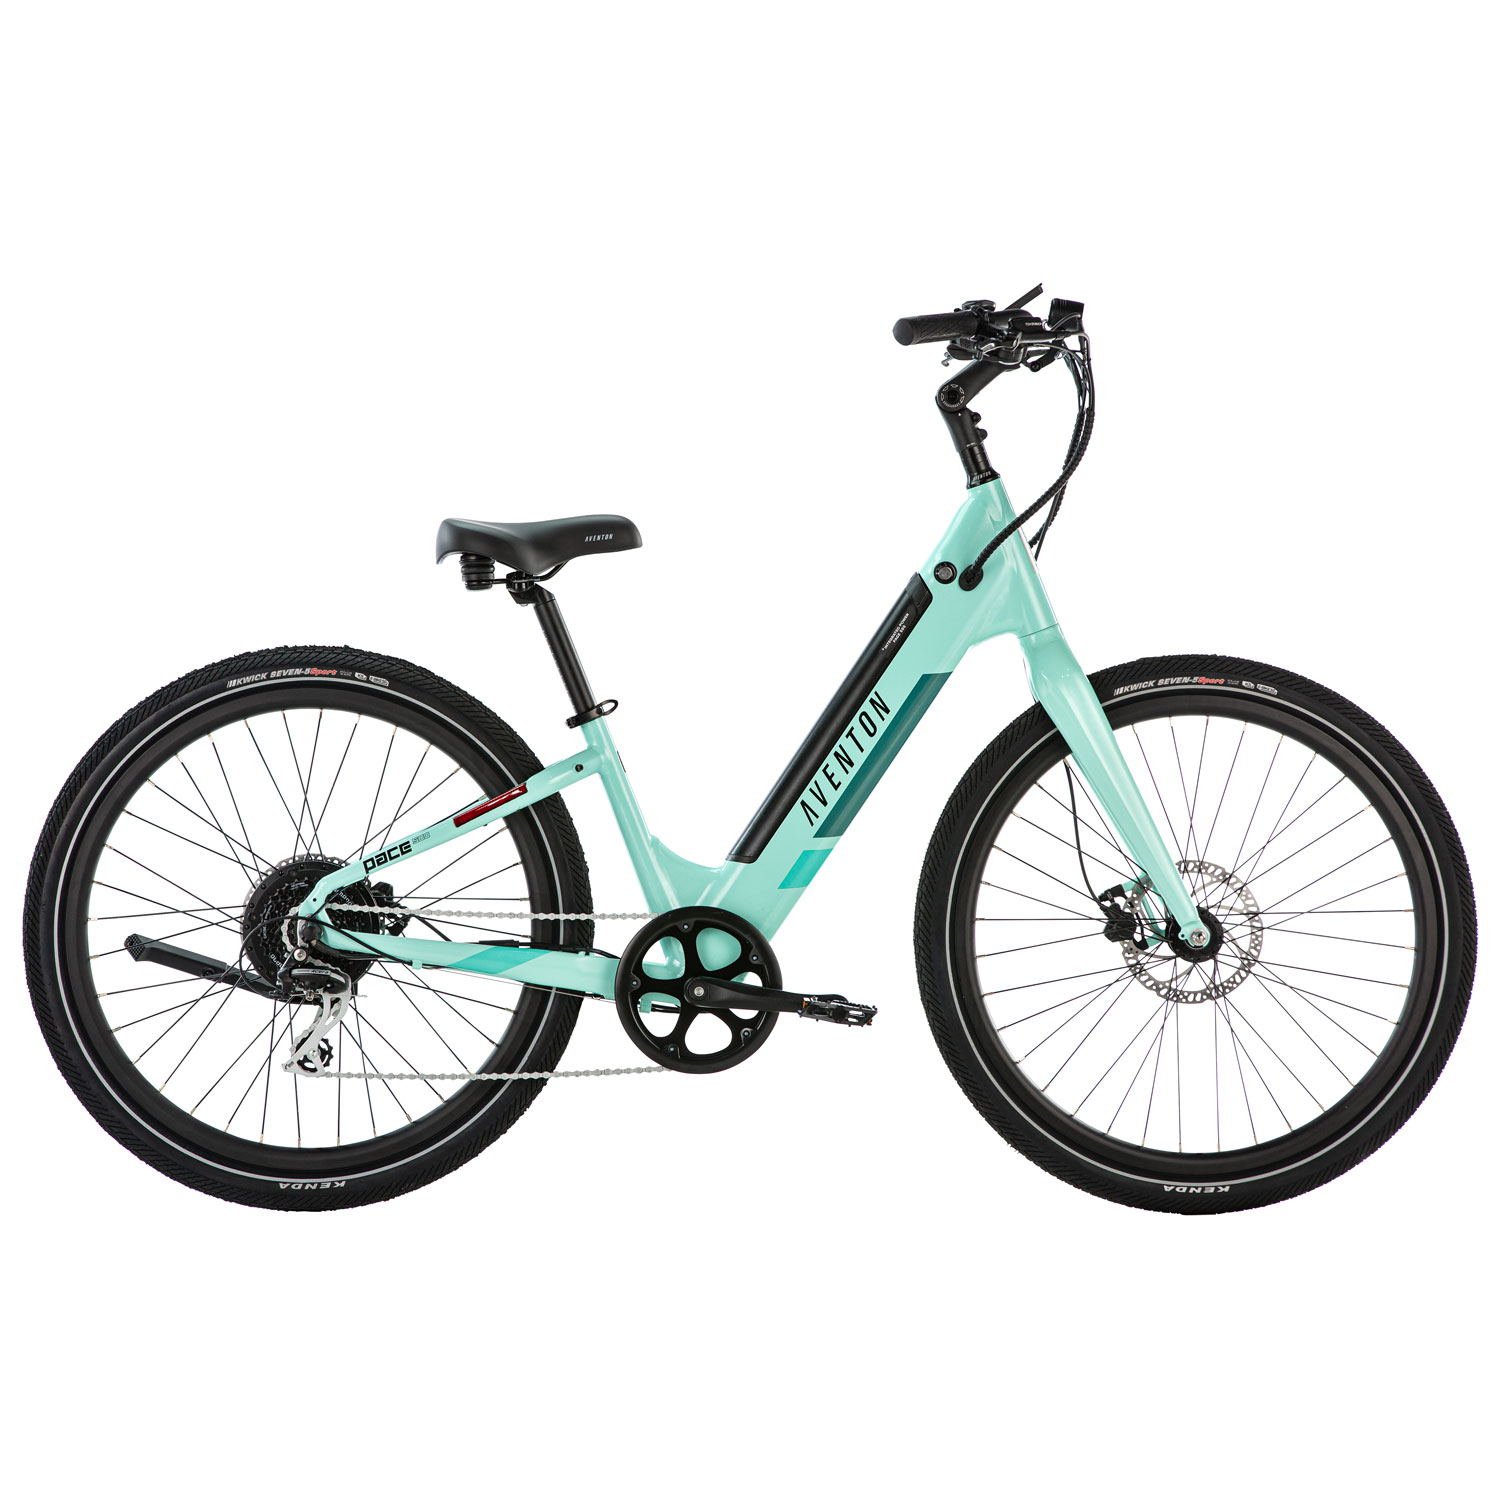 Aventon Pace 500 V2 500 W Step-Through Electric City Bike with up to 65km Battery Range - Large - Celeste